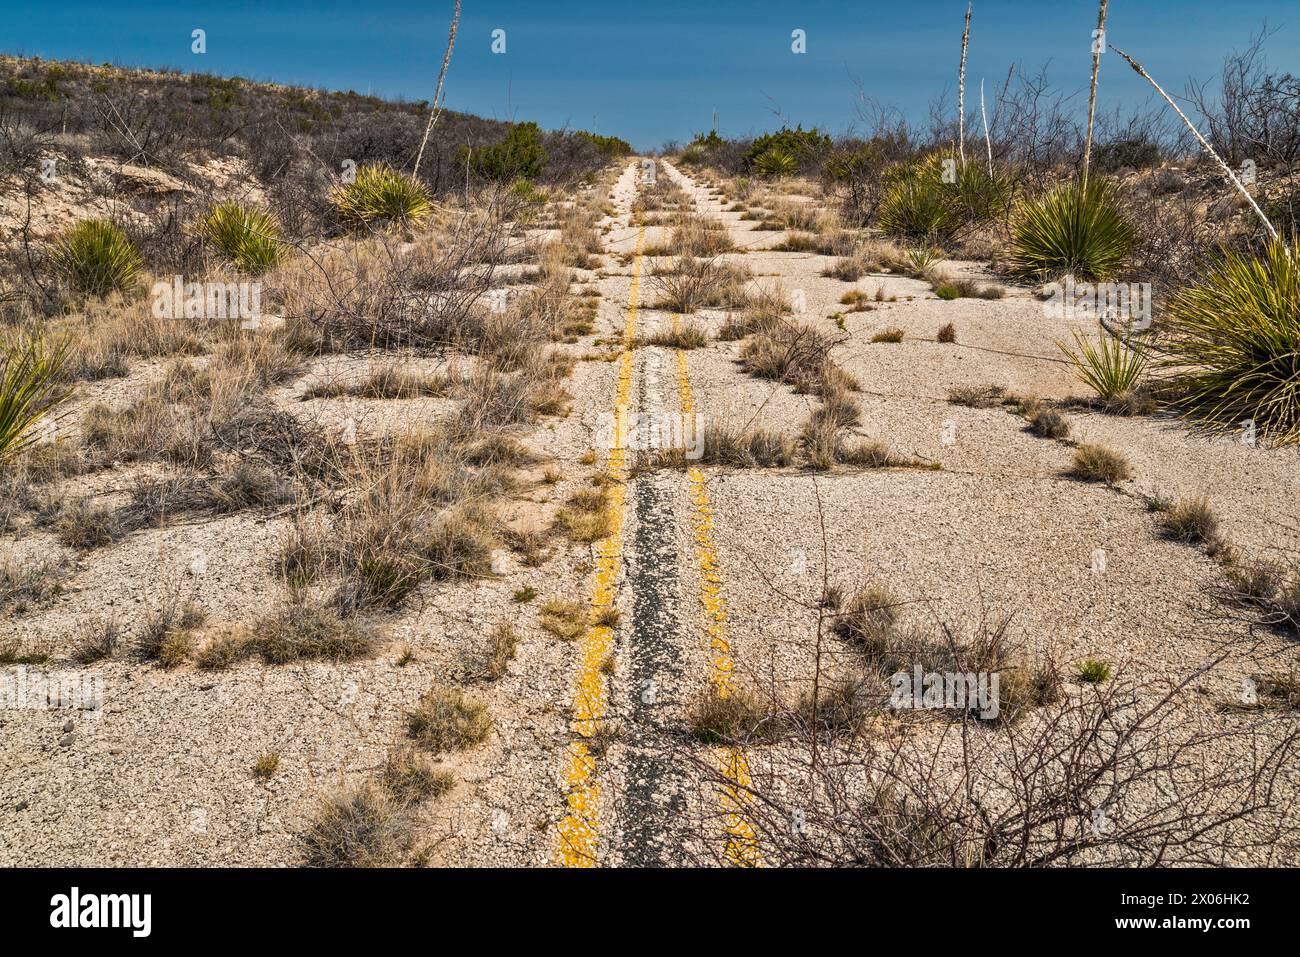 Abandoned section of US-180, US-62 highway with overgrowth, near Guadalupe Mountains, Texas, USA Stock Photo